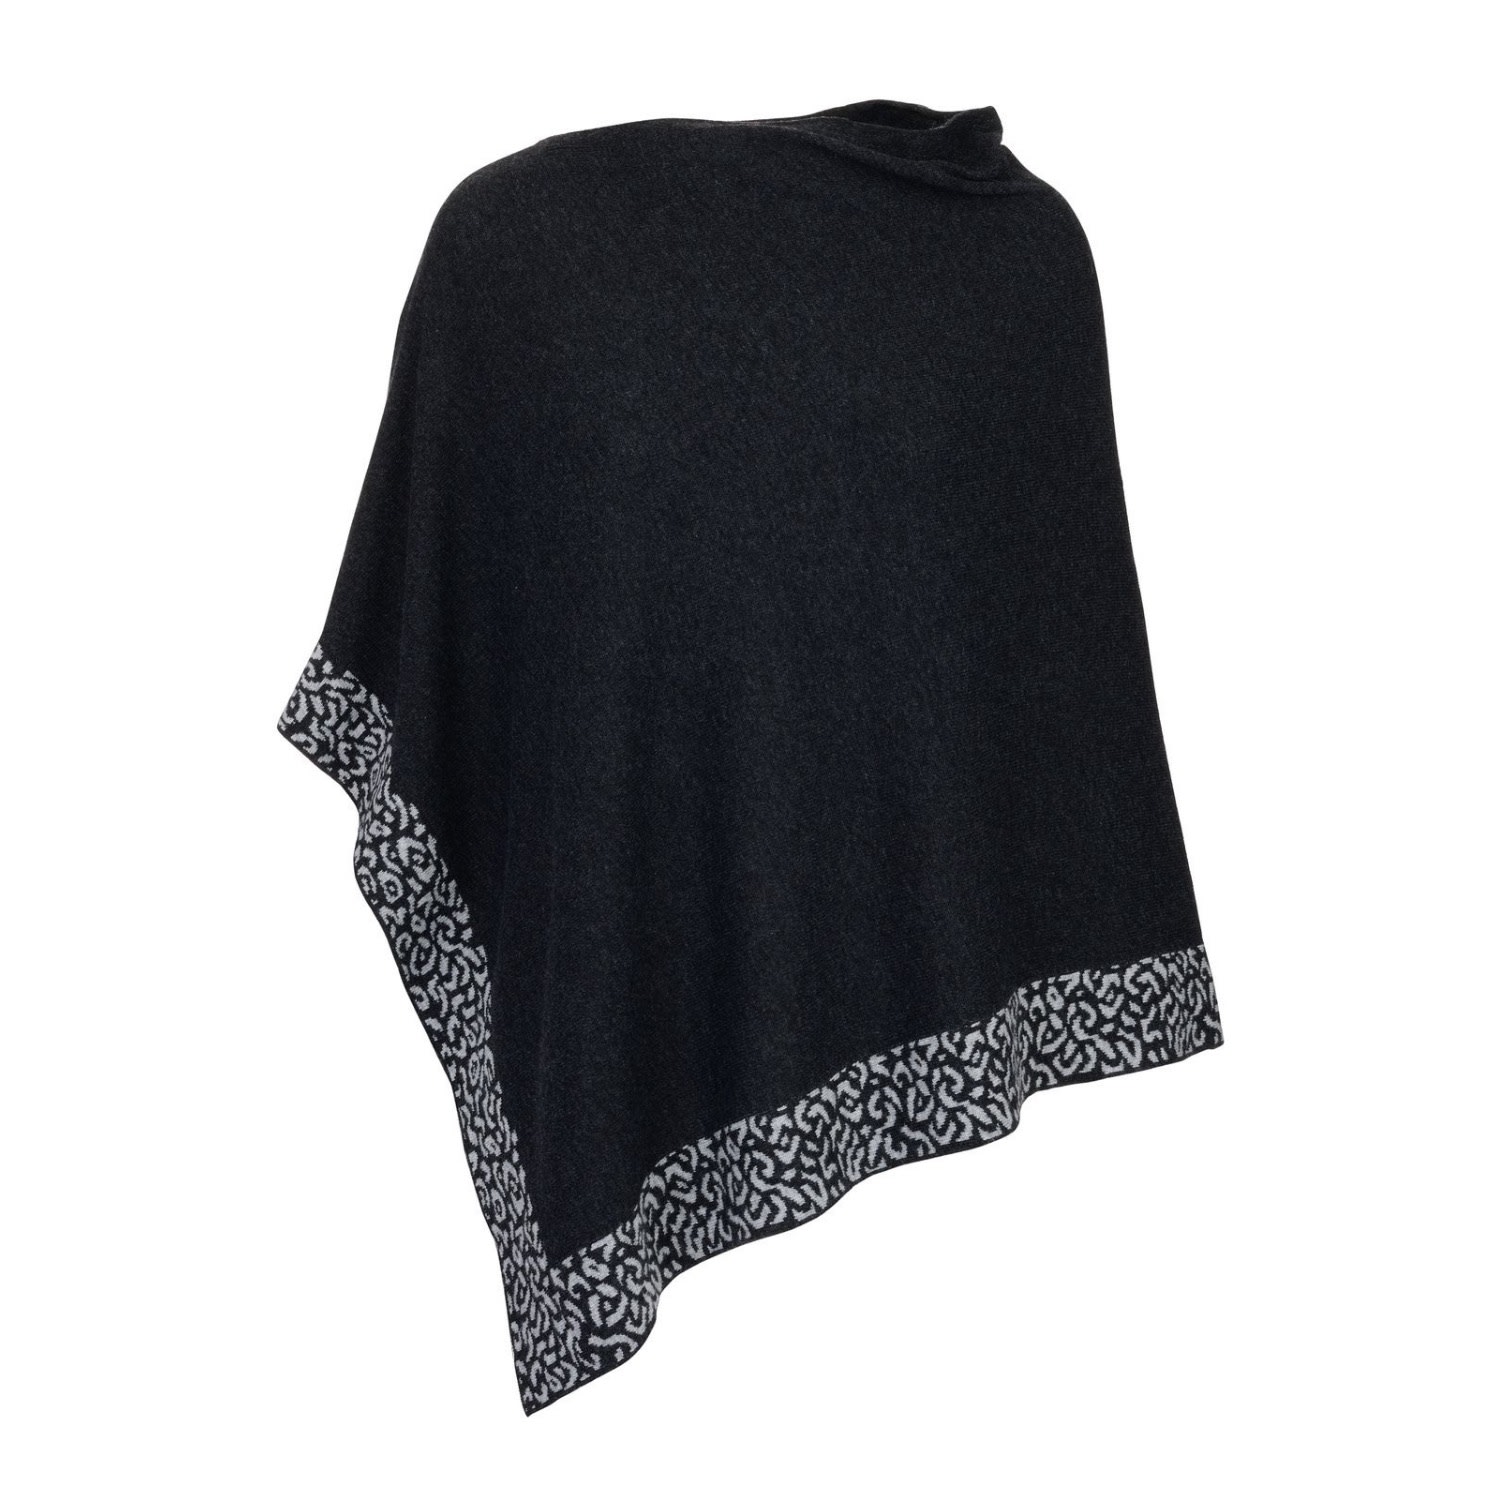 Women’s Black Cashmere Poncho Charcoal Grey With Leopard Trim One Size At Last...